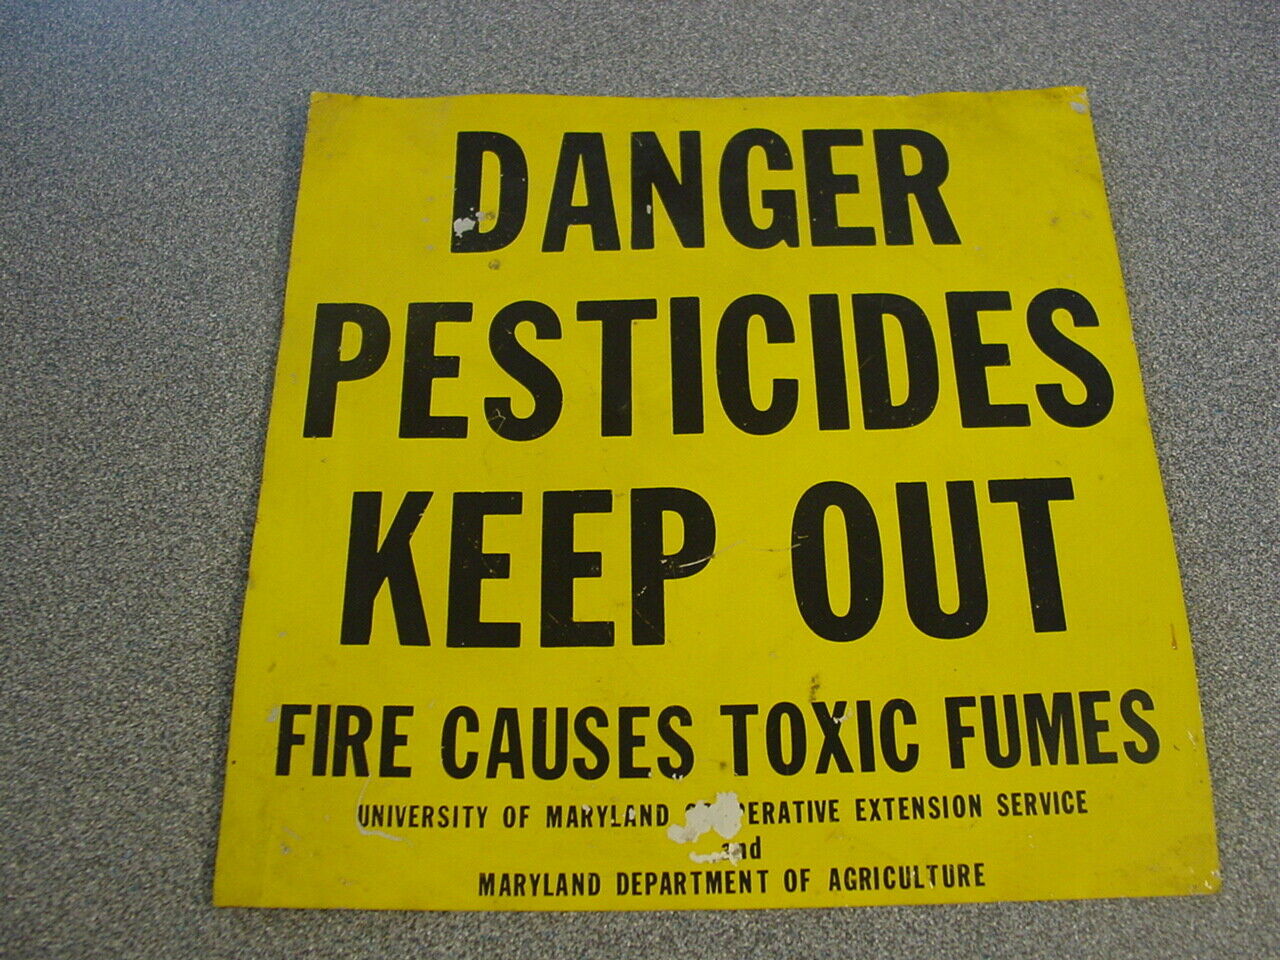 Danger Pesticides Keep Out University Maryland Department of Agriculture Sign MD